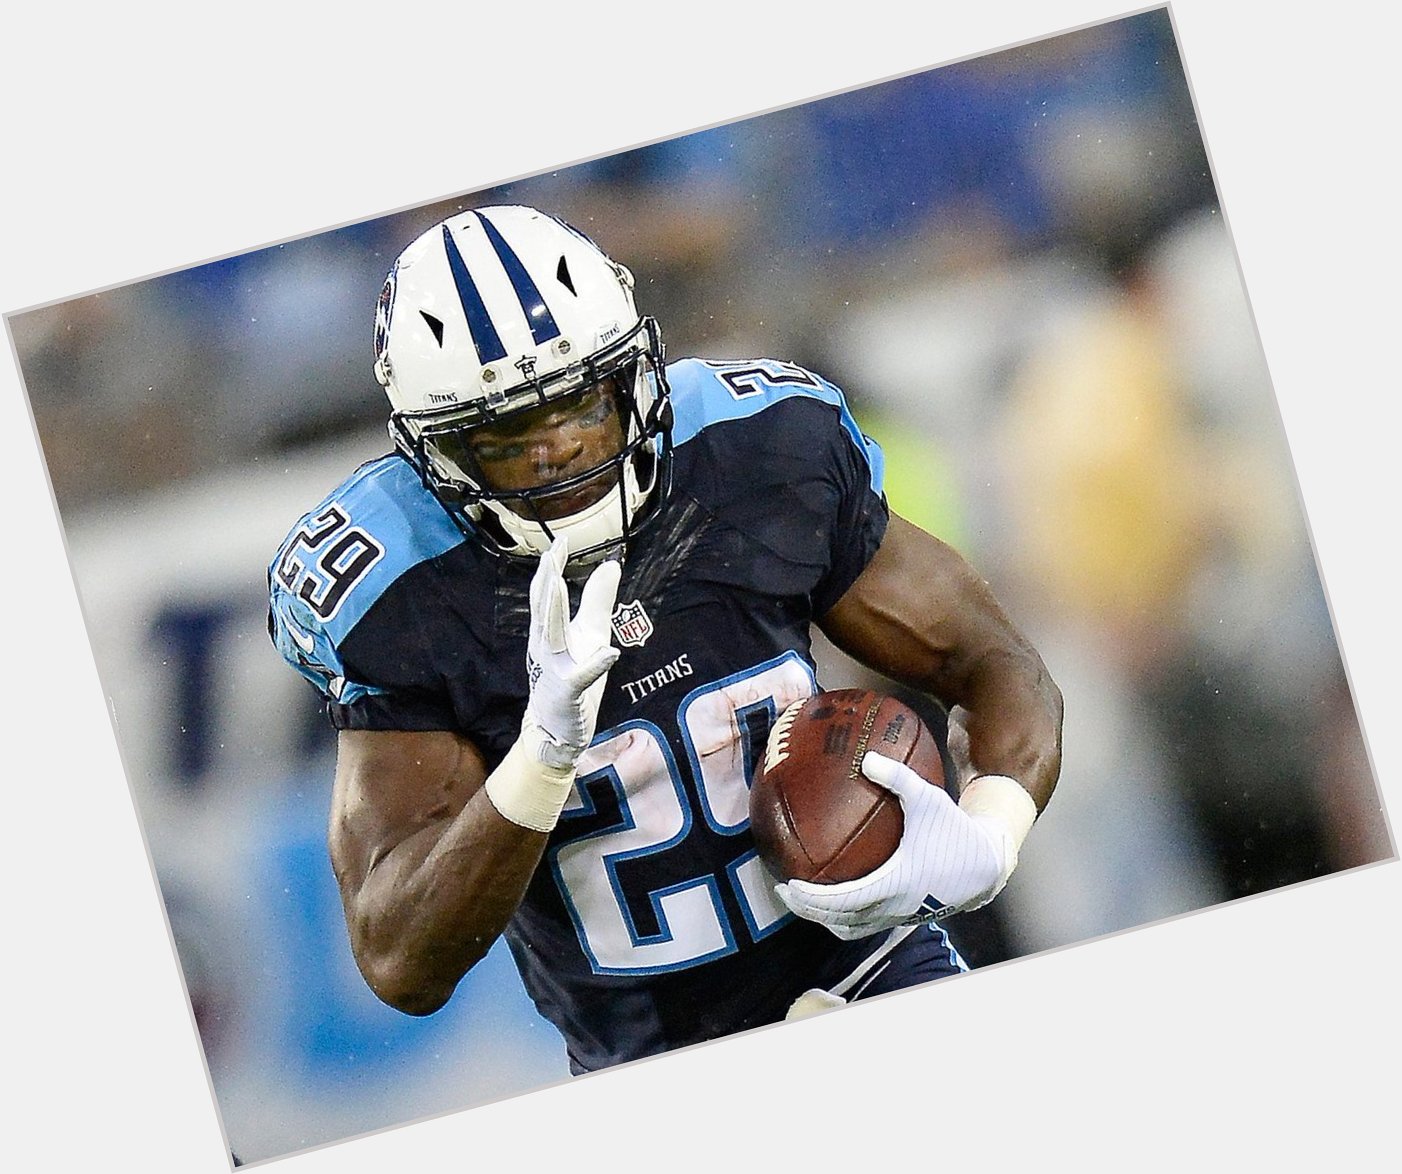 Happy Birthday to DeMarco Murray, who turns 29 today! 